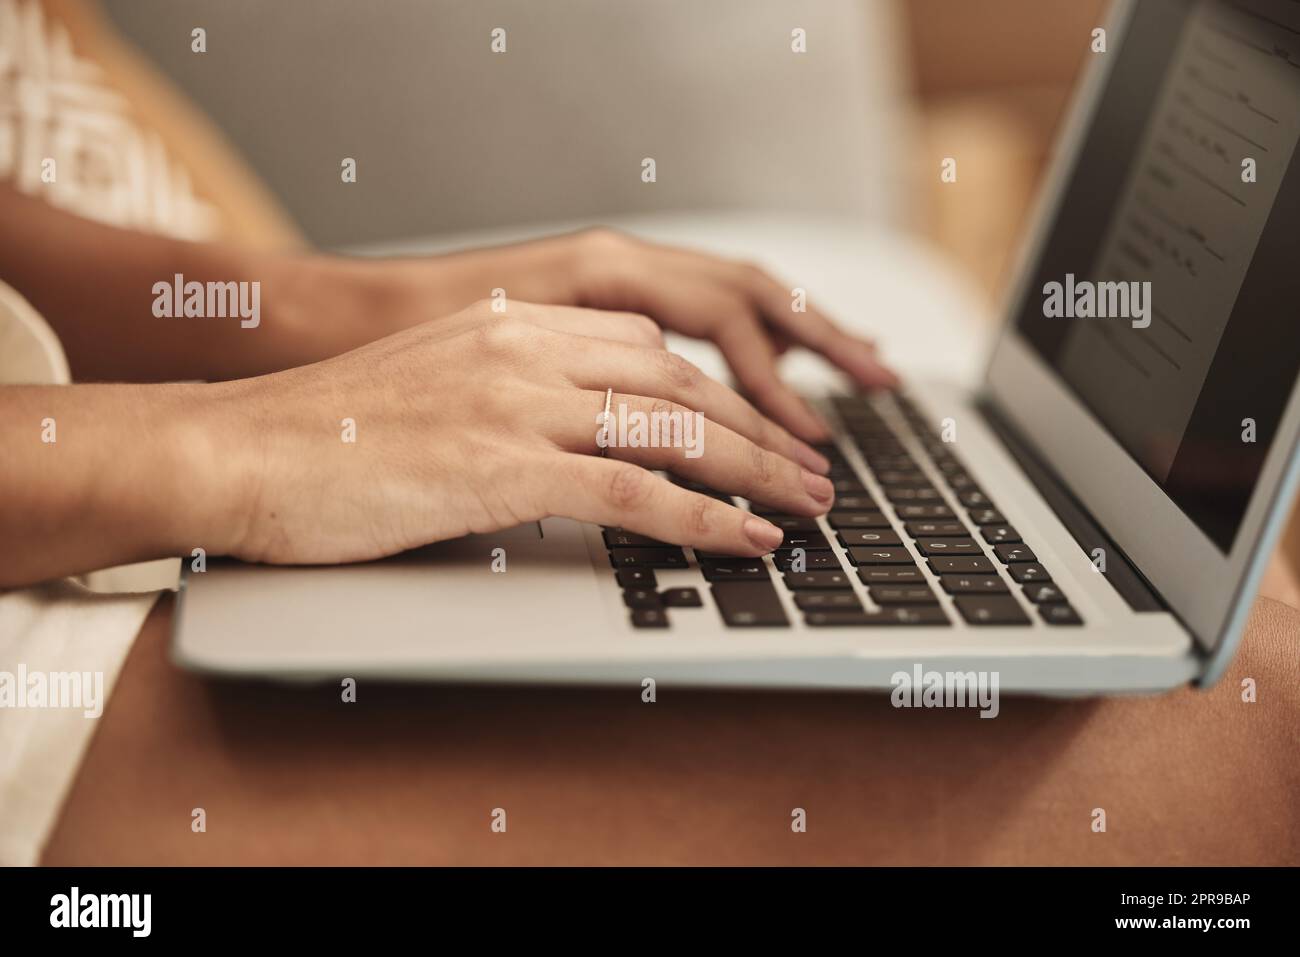 Time foe some house hunting. an unrecognizable person using a laptop at home. Stock Photo